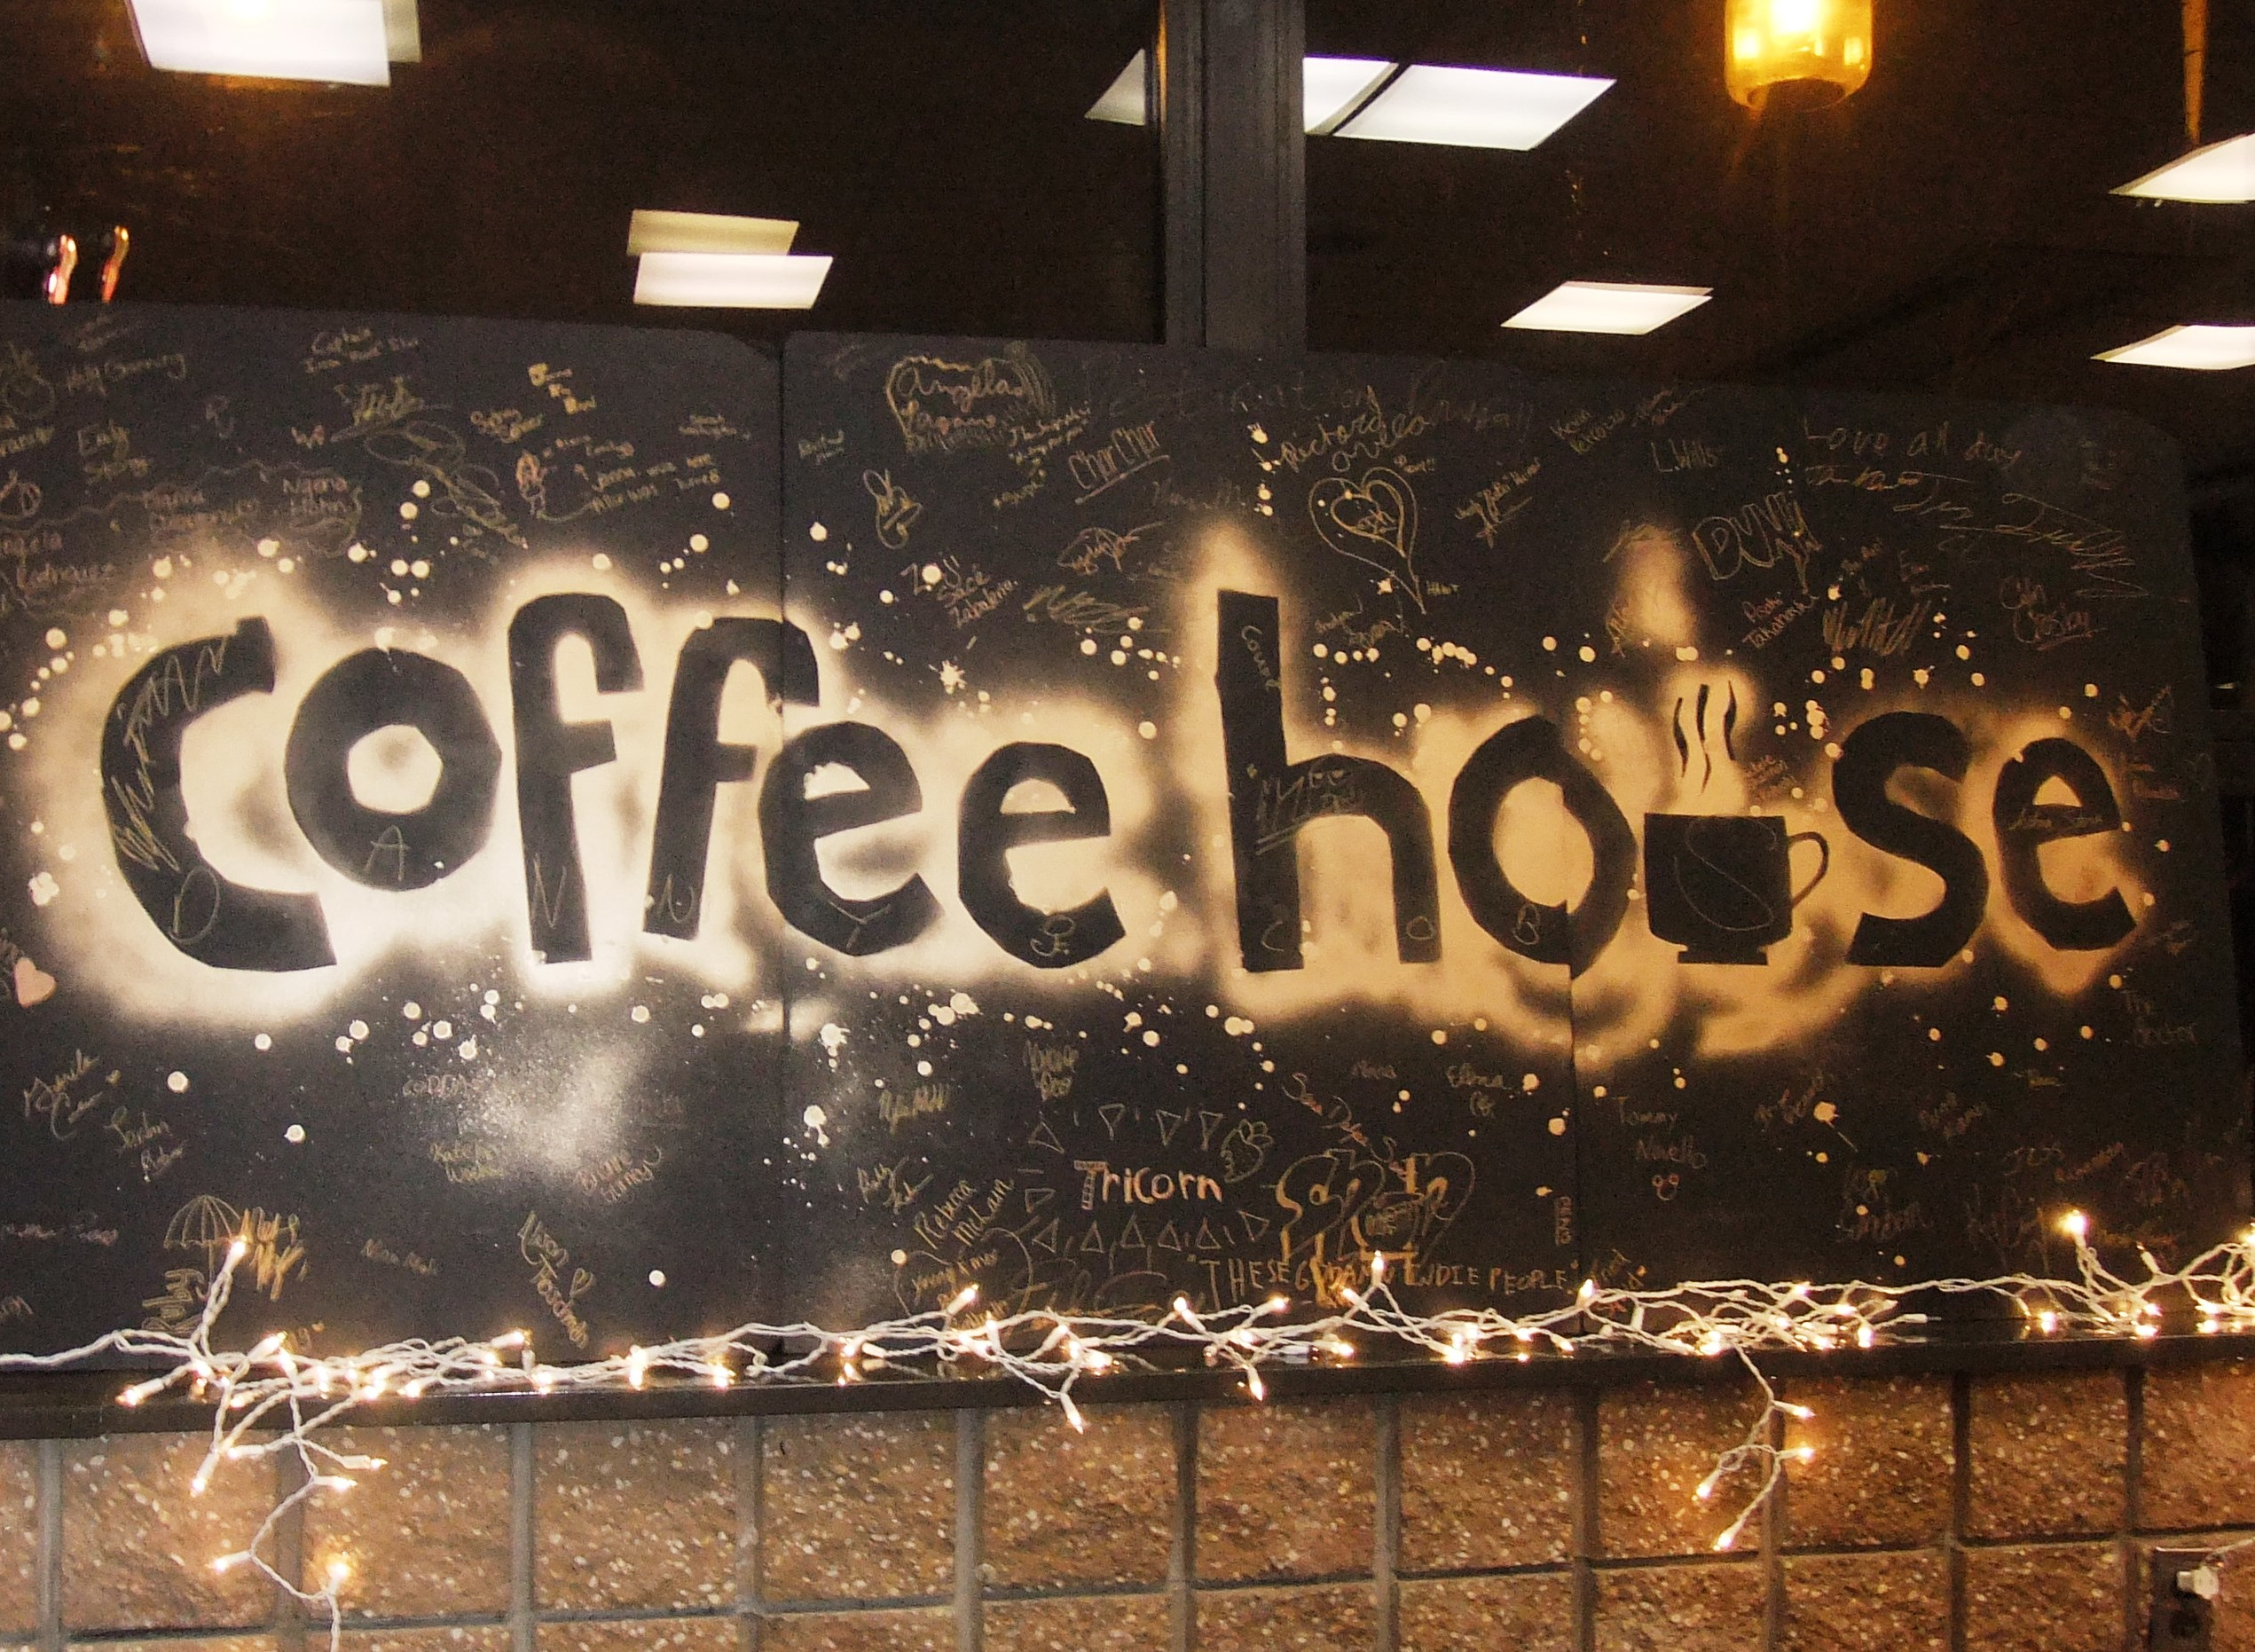 Bay View Academy Coffee House Fundraiser